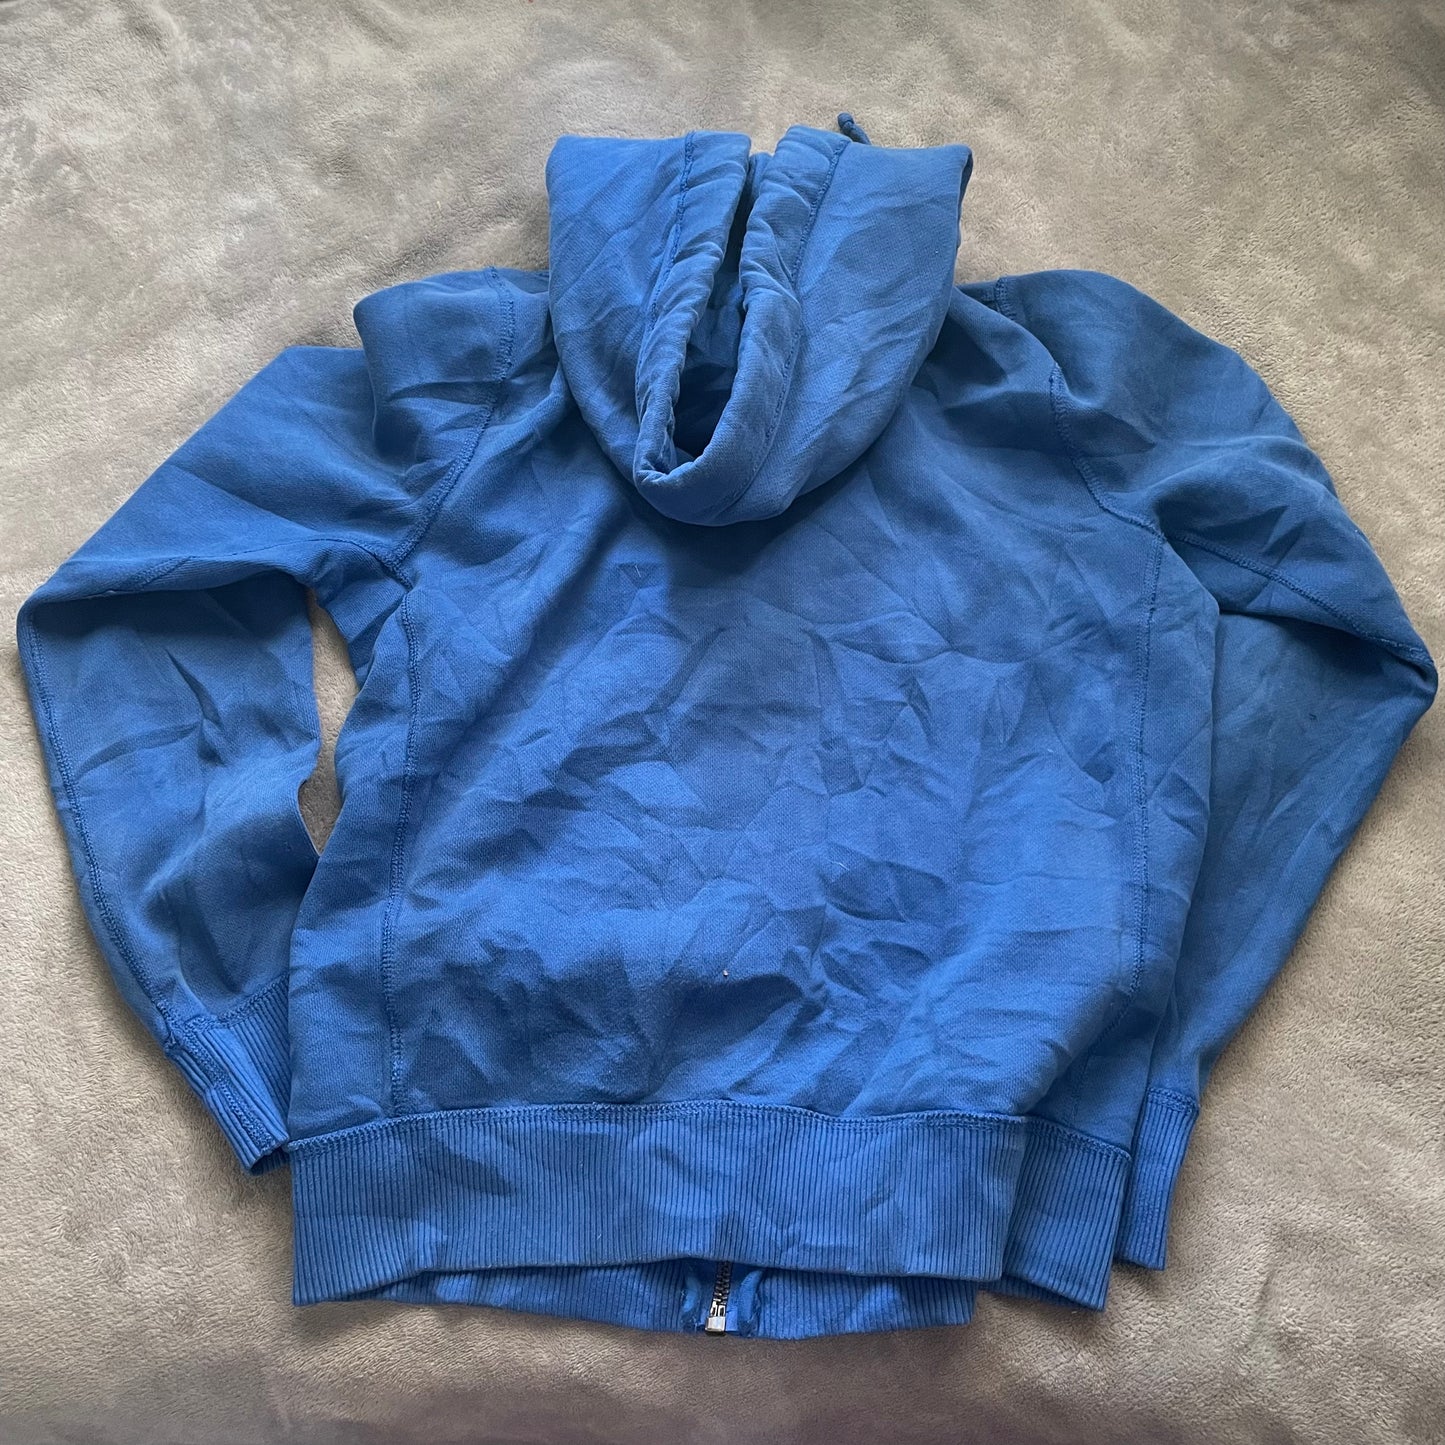 Abercrombie and Fitch graphic zip up hoodie jumper